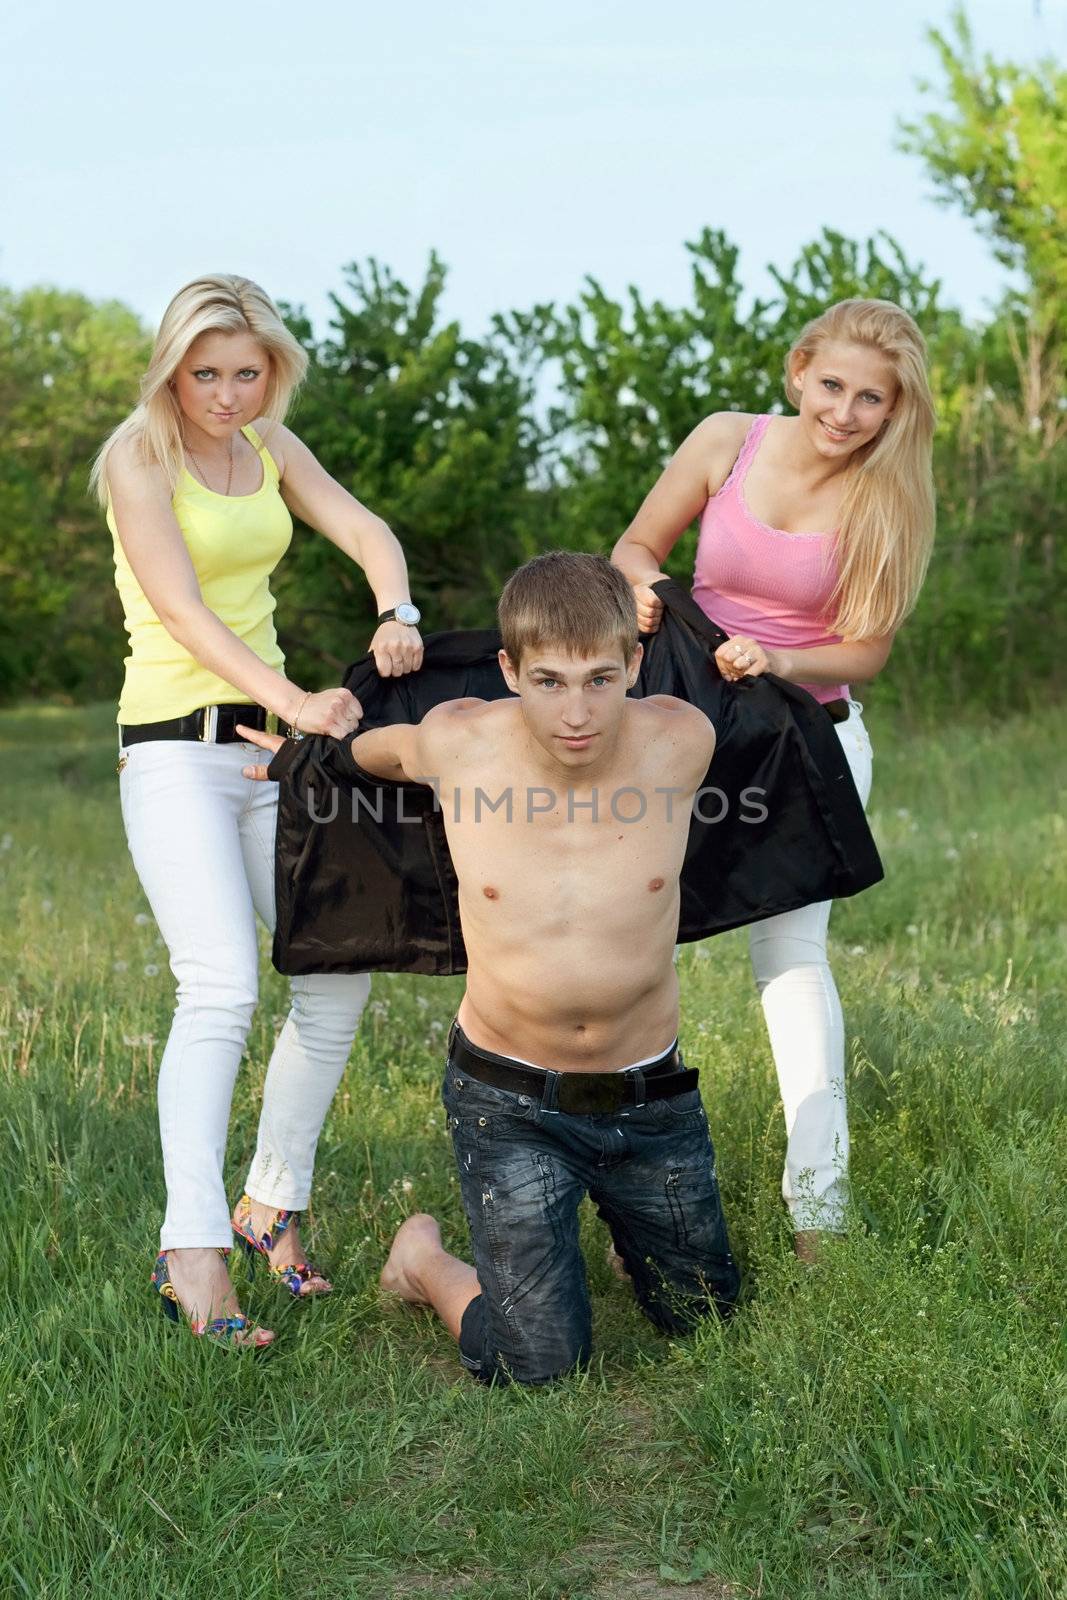 Two playful blonde and young man outdoors. Focus on guy